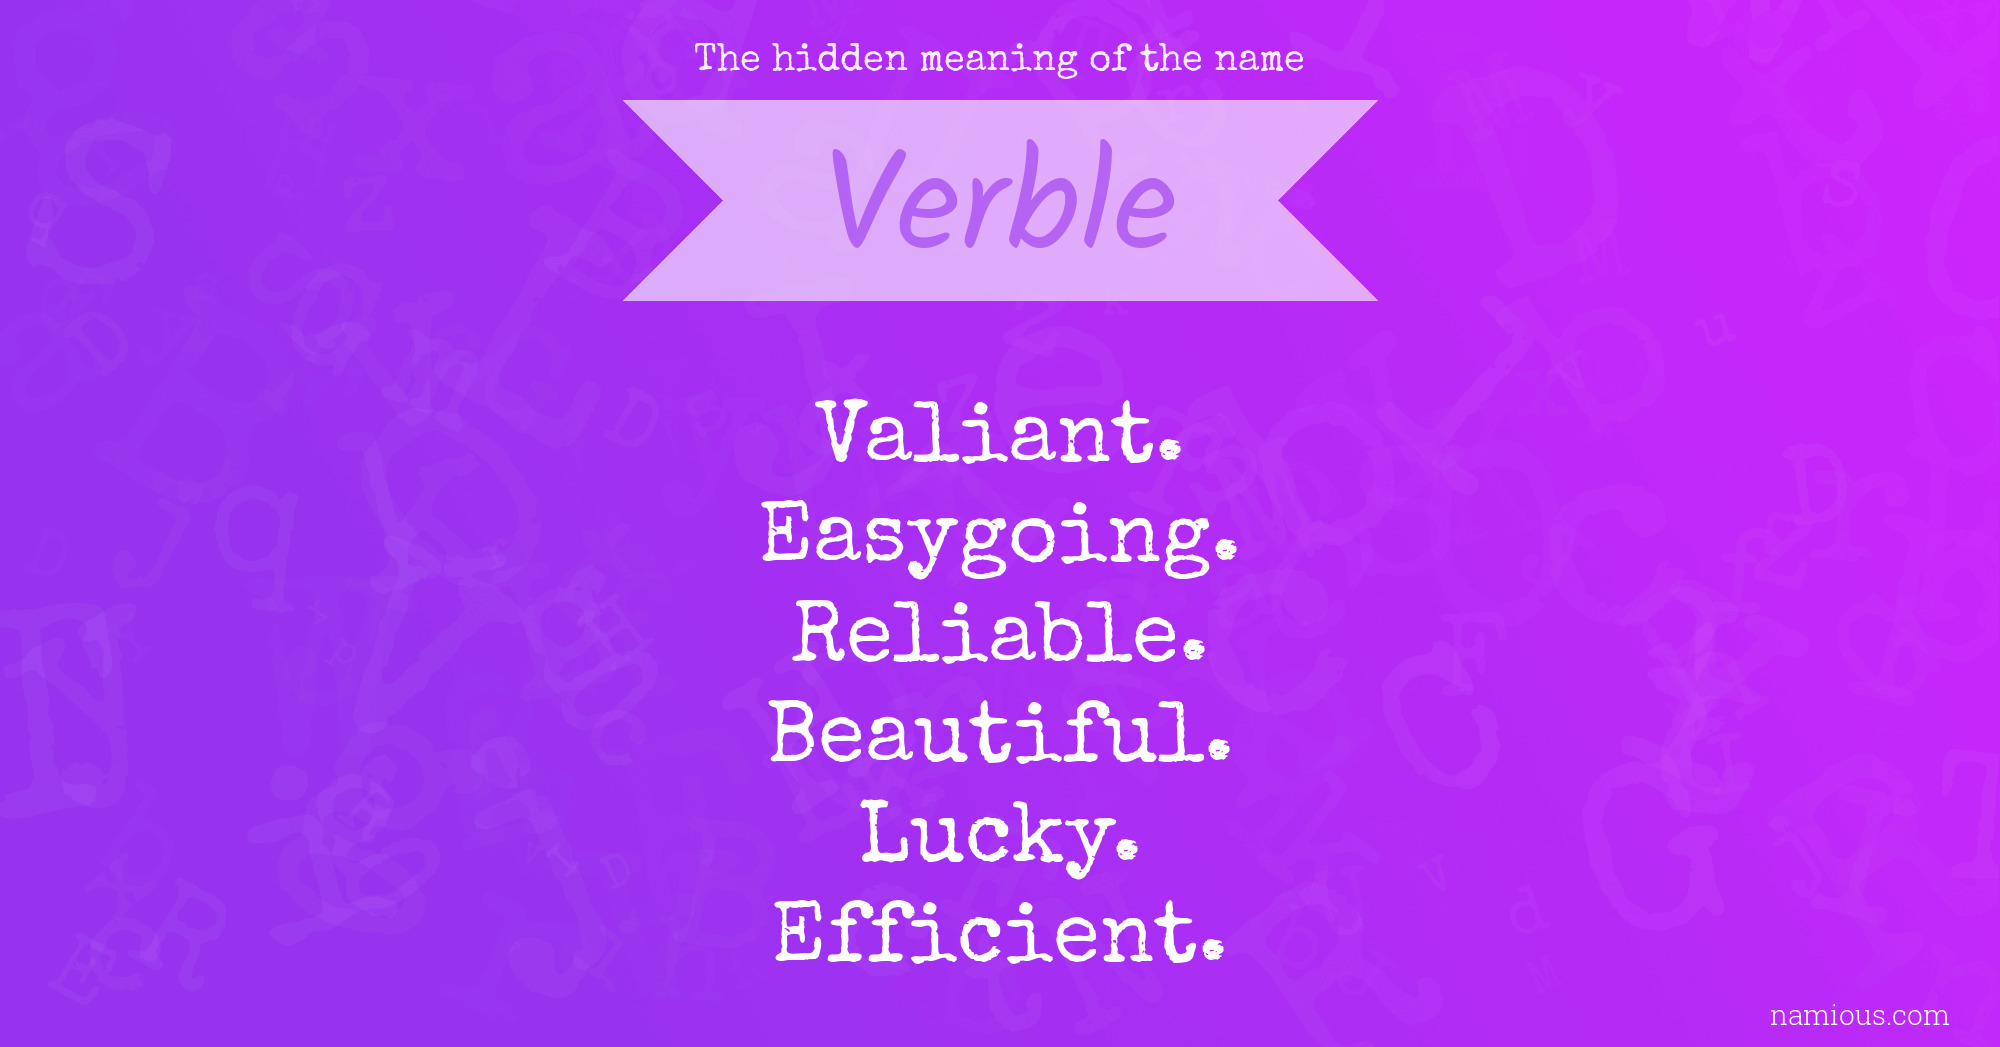 The hidden meaning of the name Verble